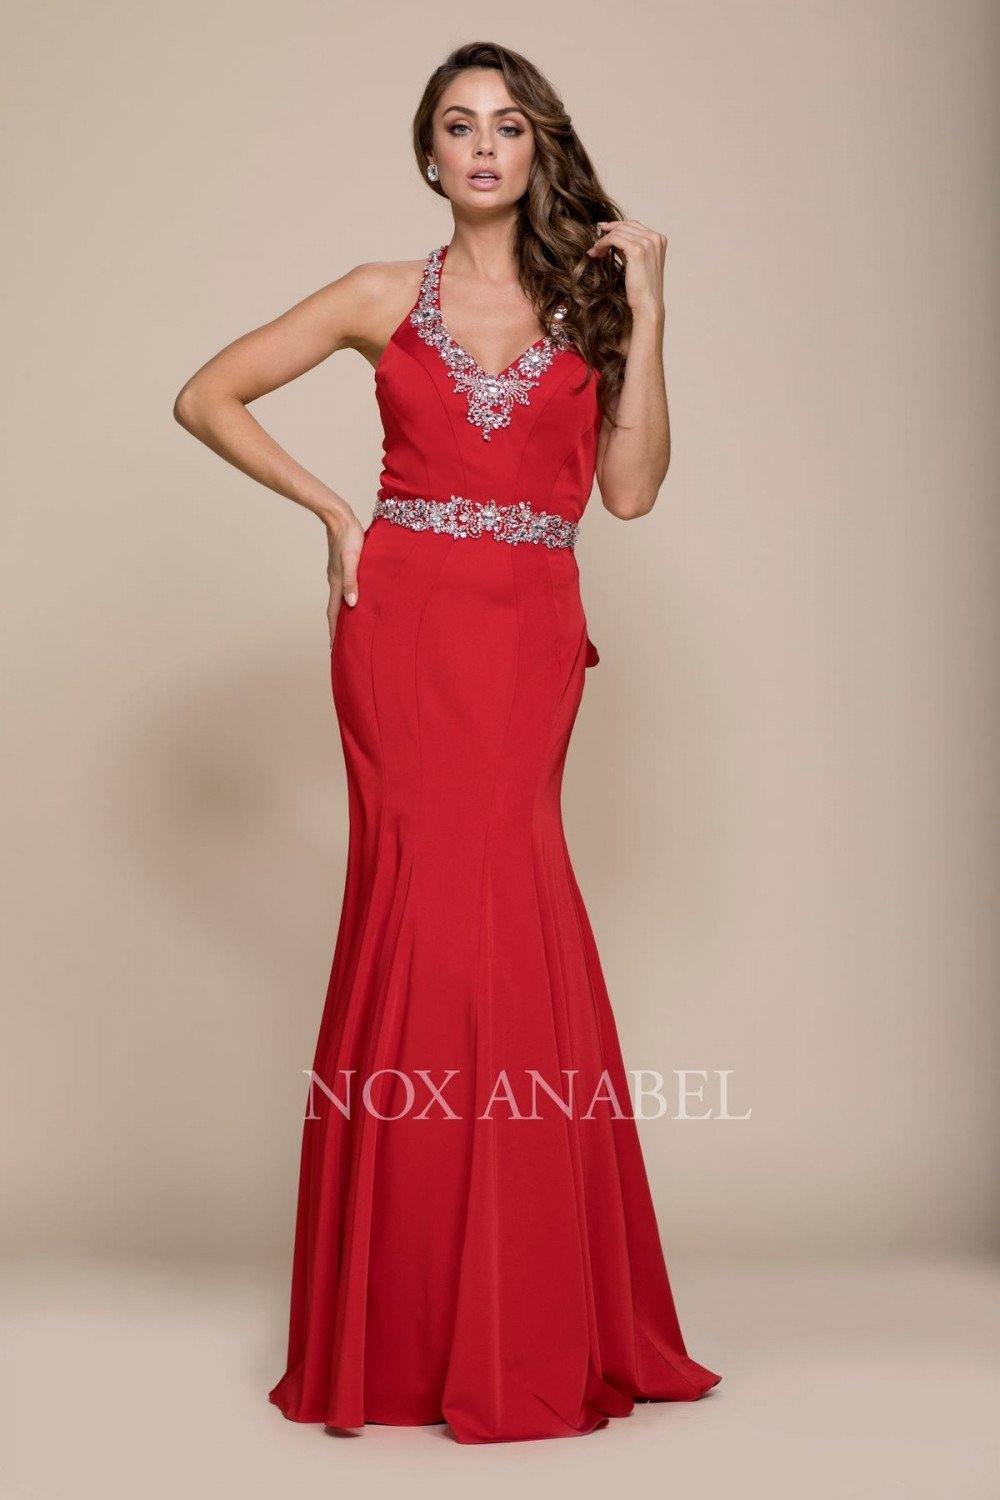 Long Beaded Ruffled Prom Dress Formal - The Dress Outlet Nox Anabel